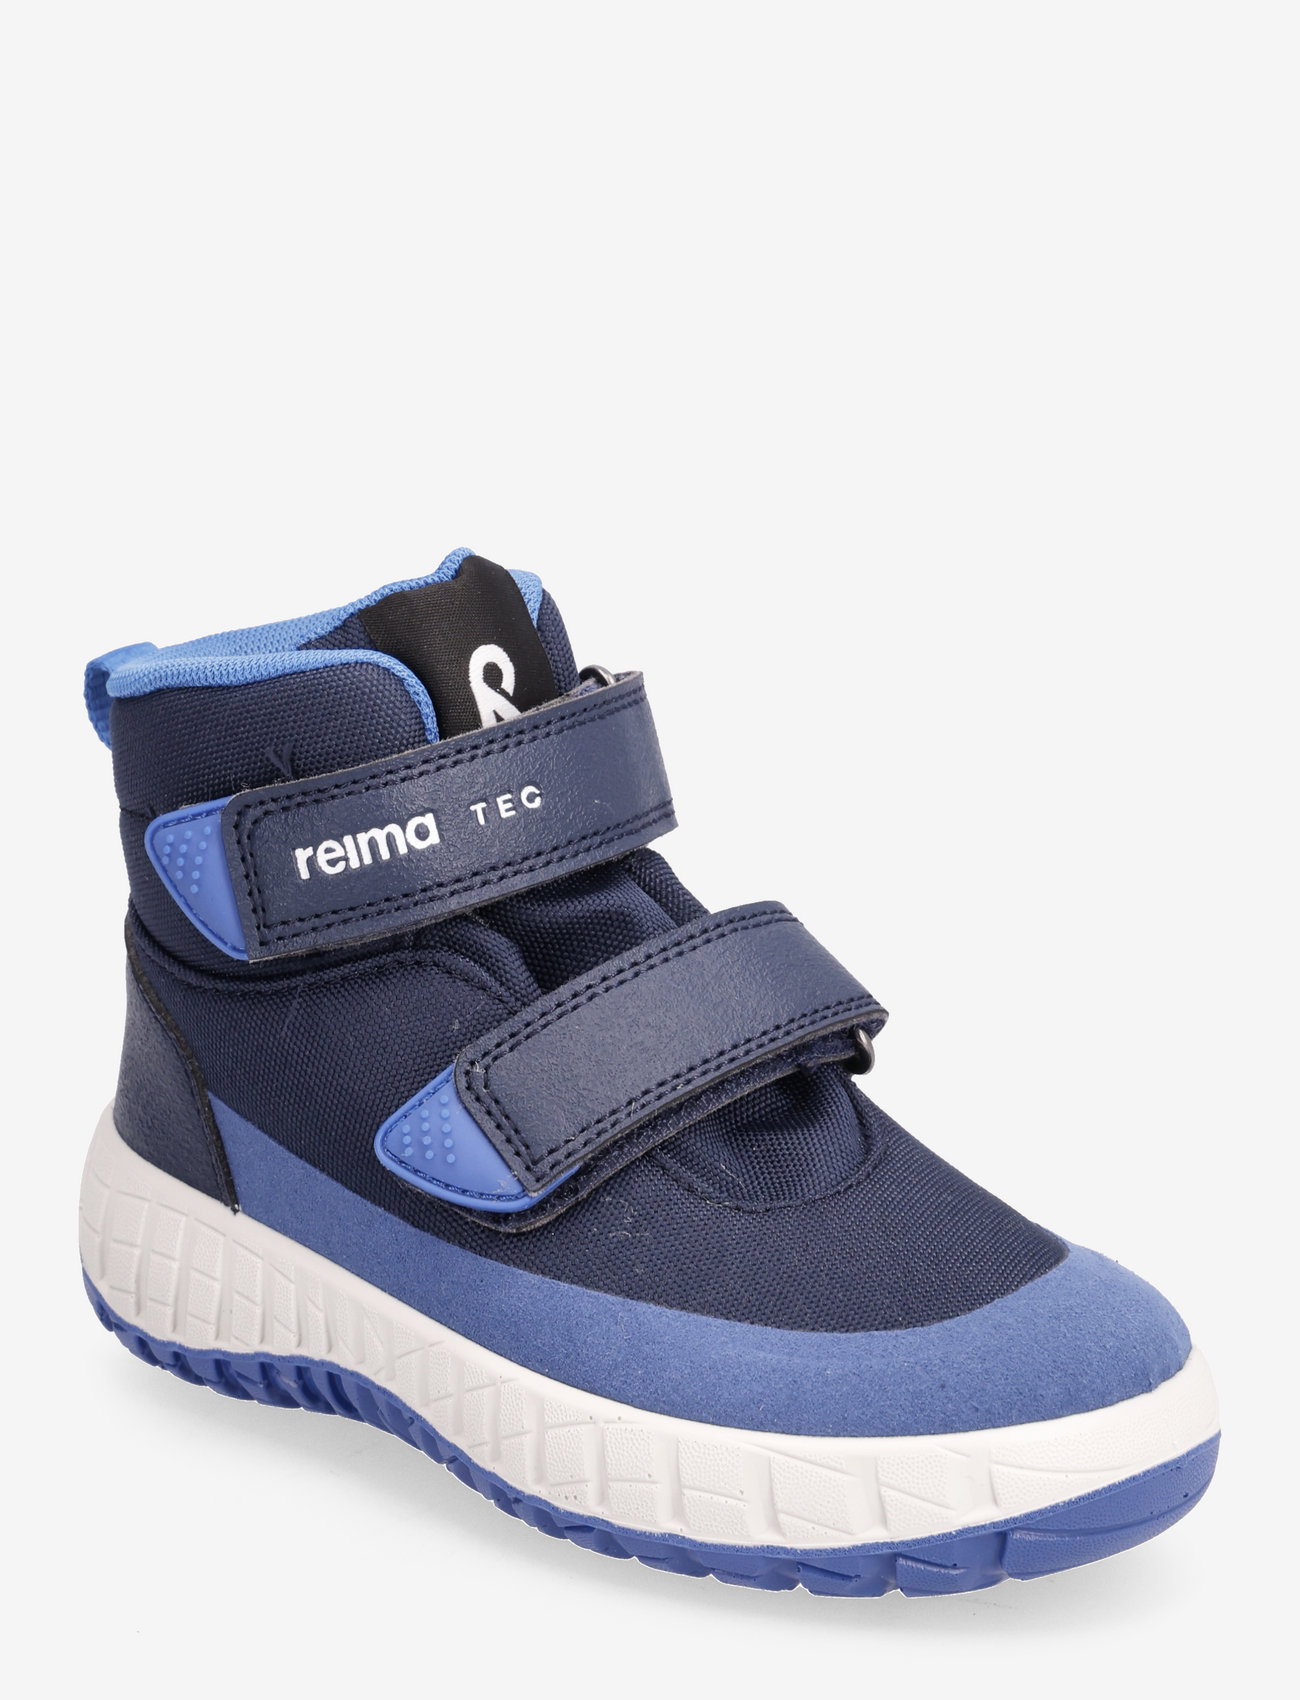 Reima - Reimatec shoes, Patter 2.0 - høje sneakers - navy - 0